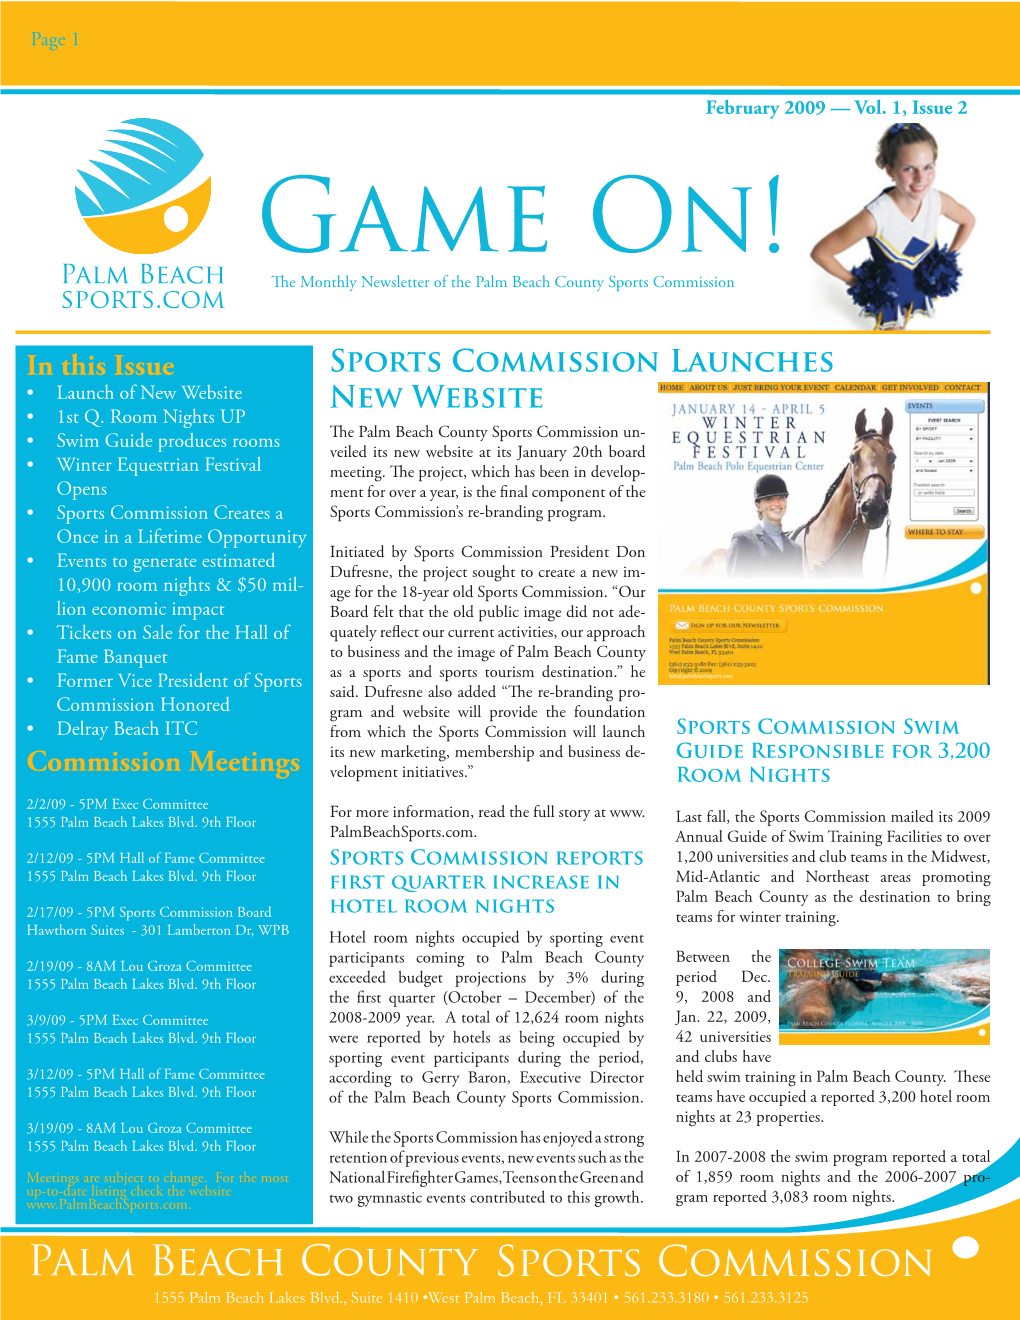 Game On! the Monthly Newsletter of the Palm Beach County Sports Commission